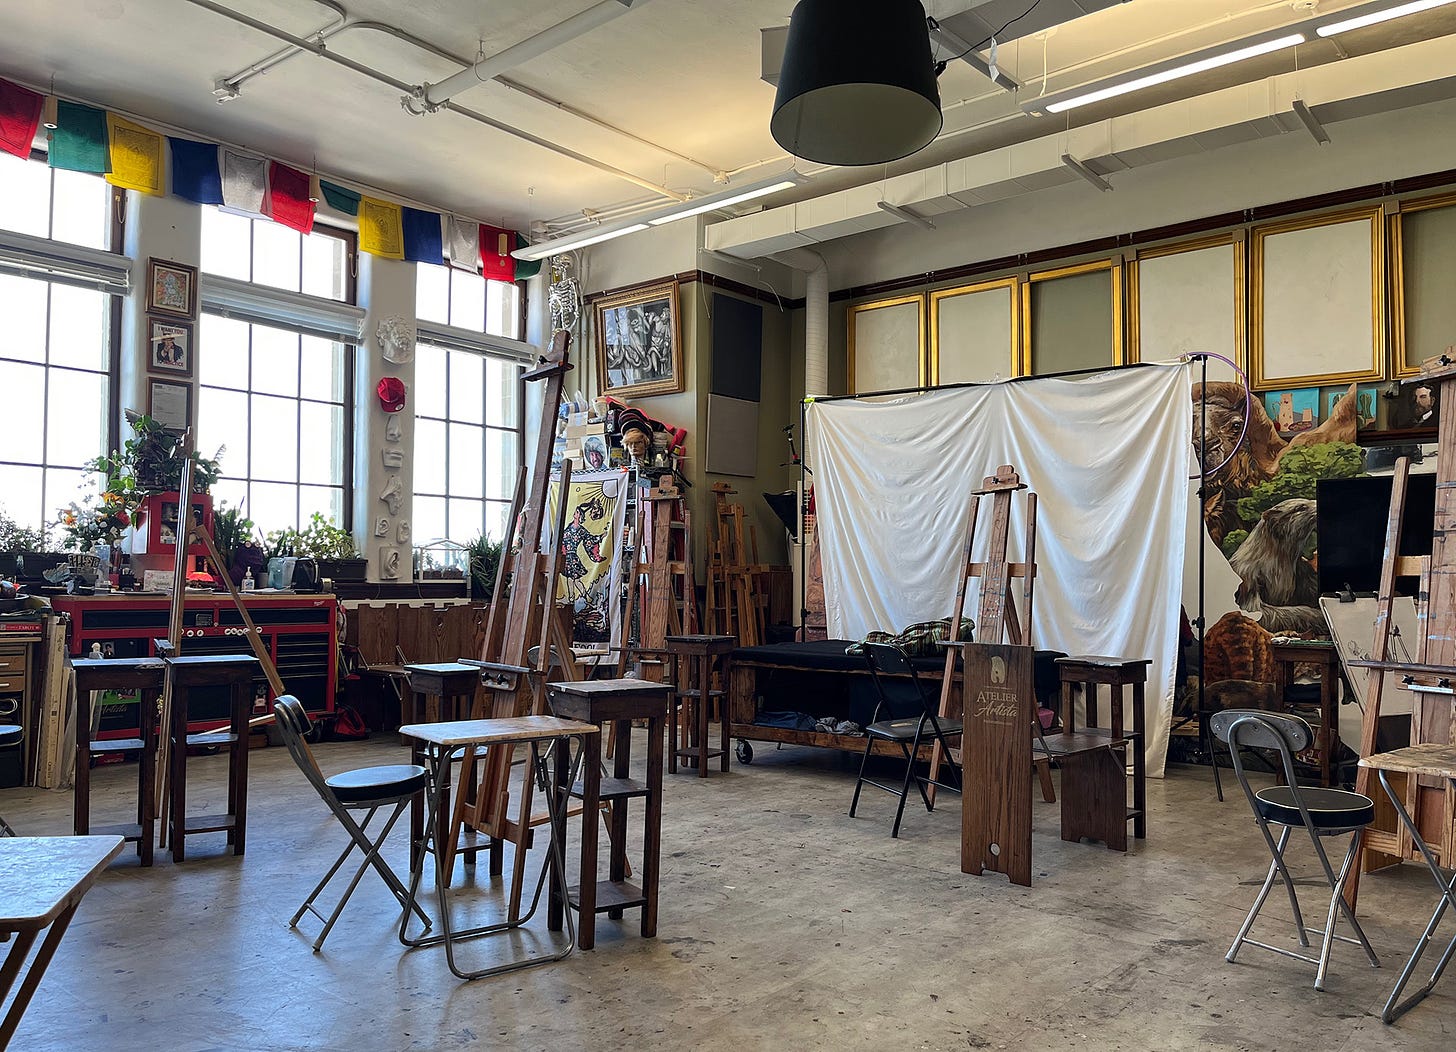 Empty painting studio with several statios of easels, chairs and little tables.